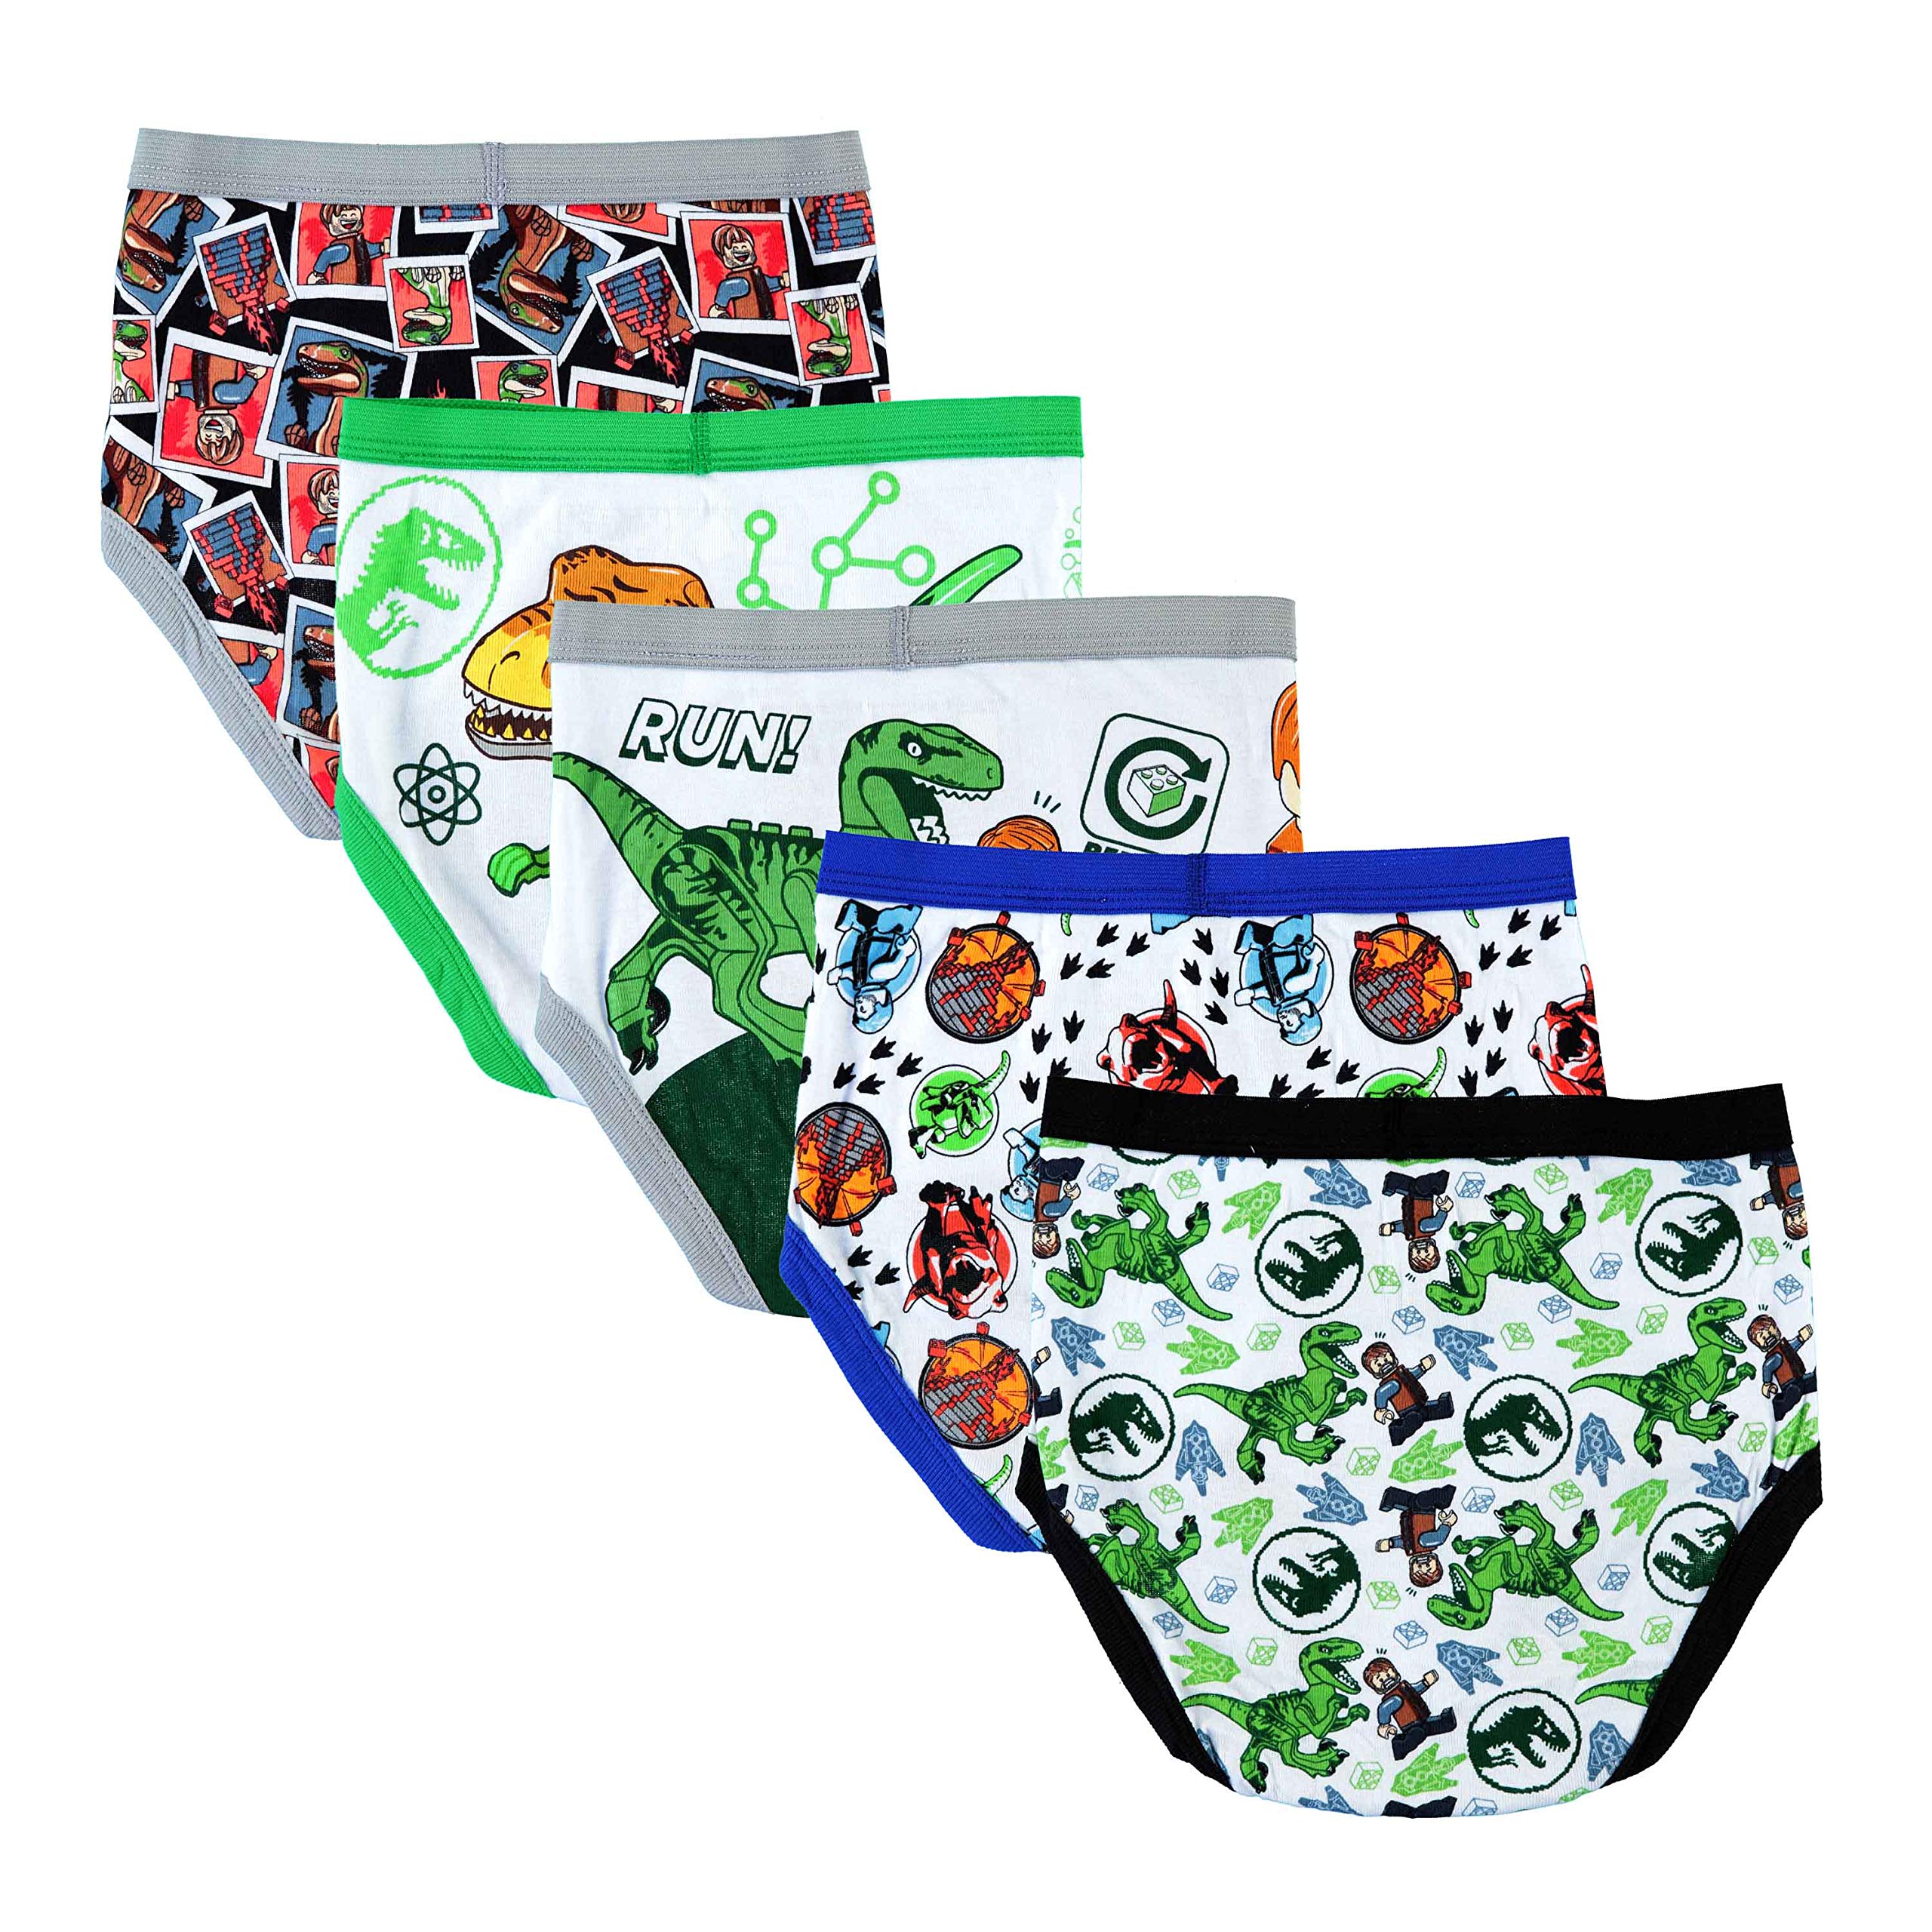 LEGO Boys' 100% Combed Cotton Underwear with Jurassic World, Star Wars, Batman and Core Sizes 4, 6, 8